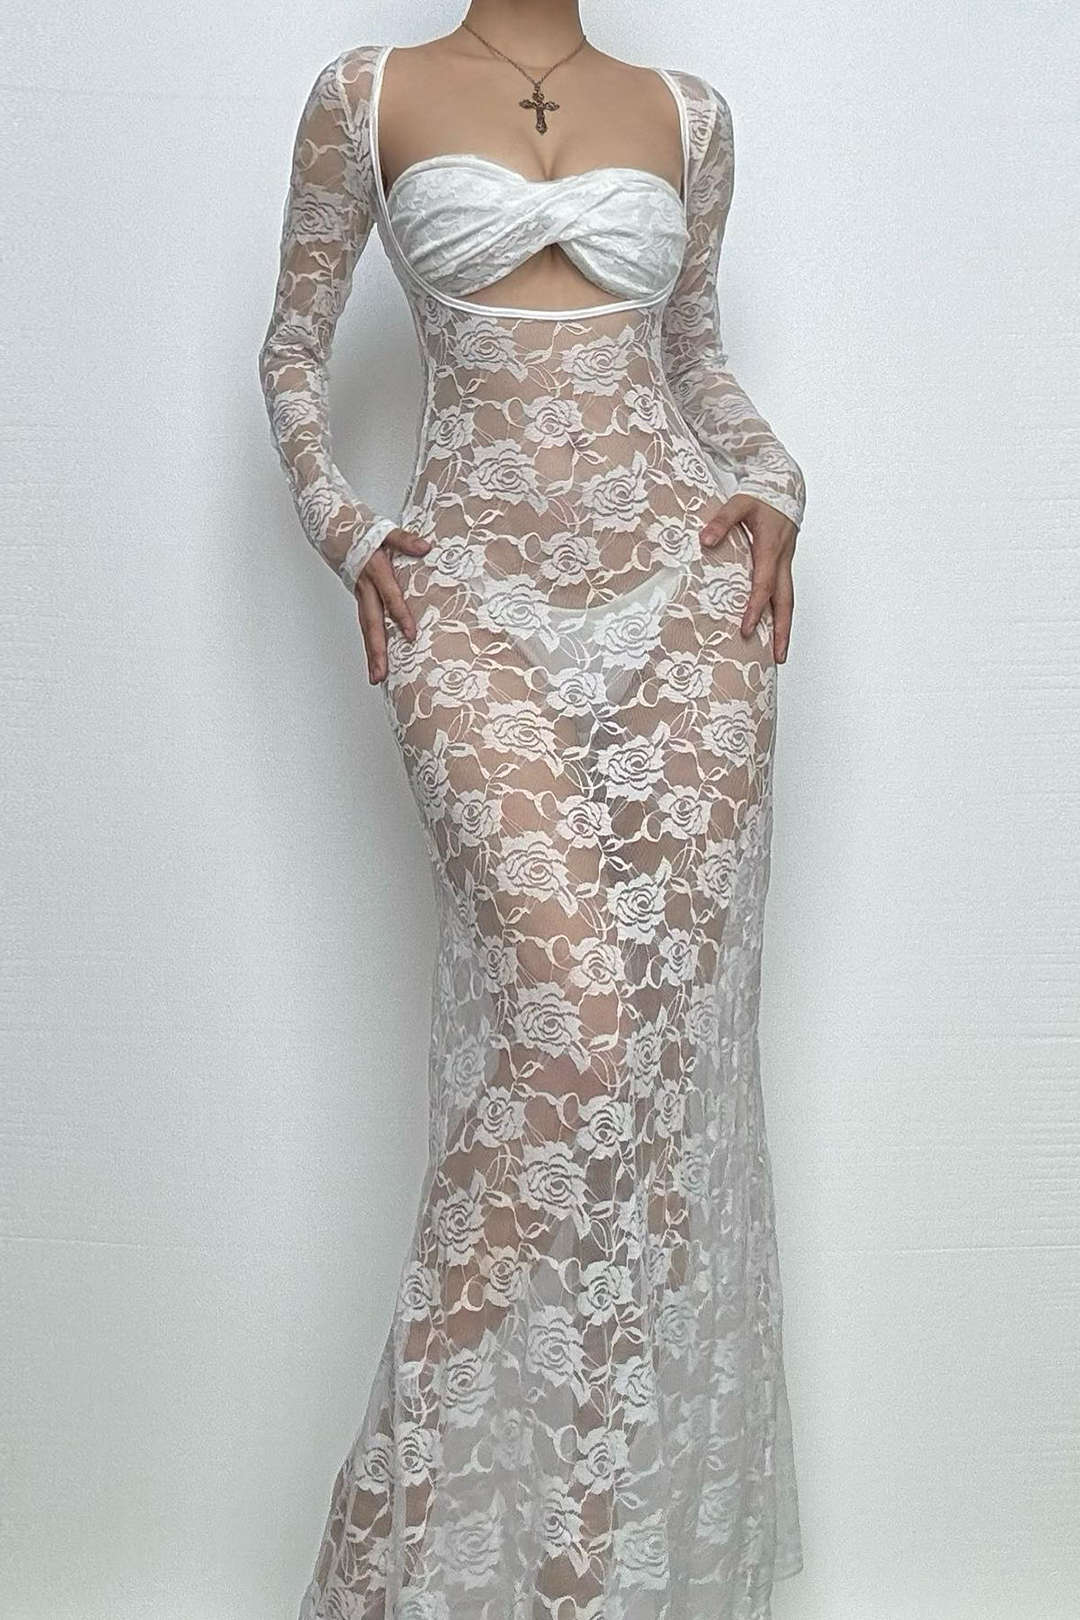 Sheer Lace Twisted Cut Out Maxi Dress